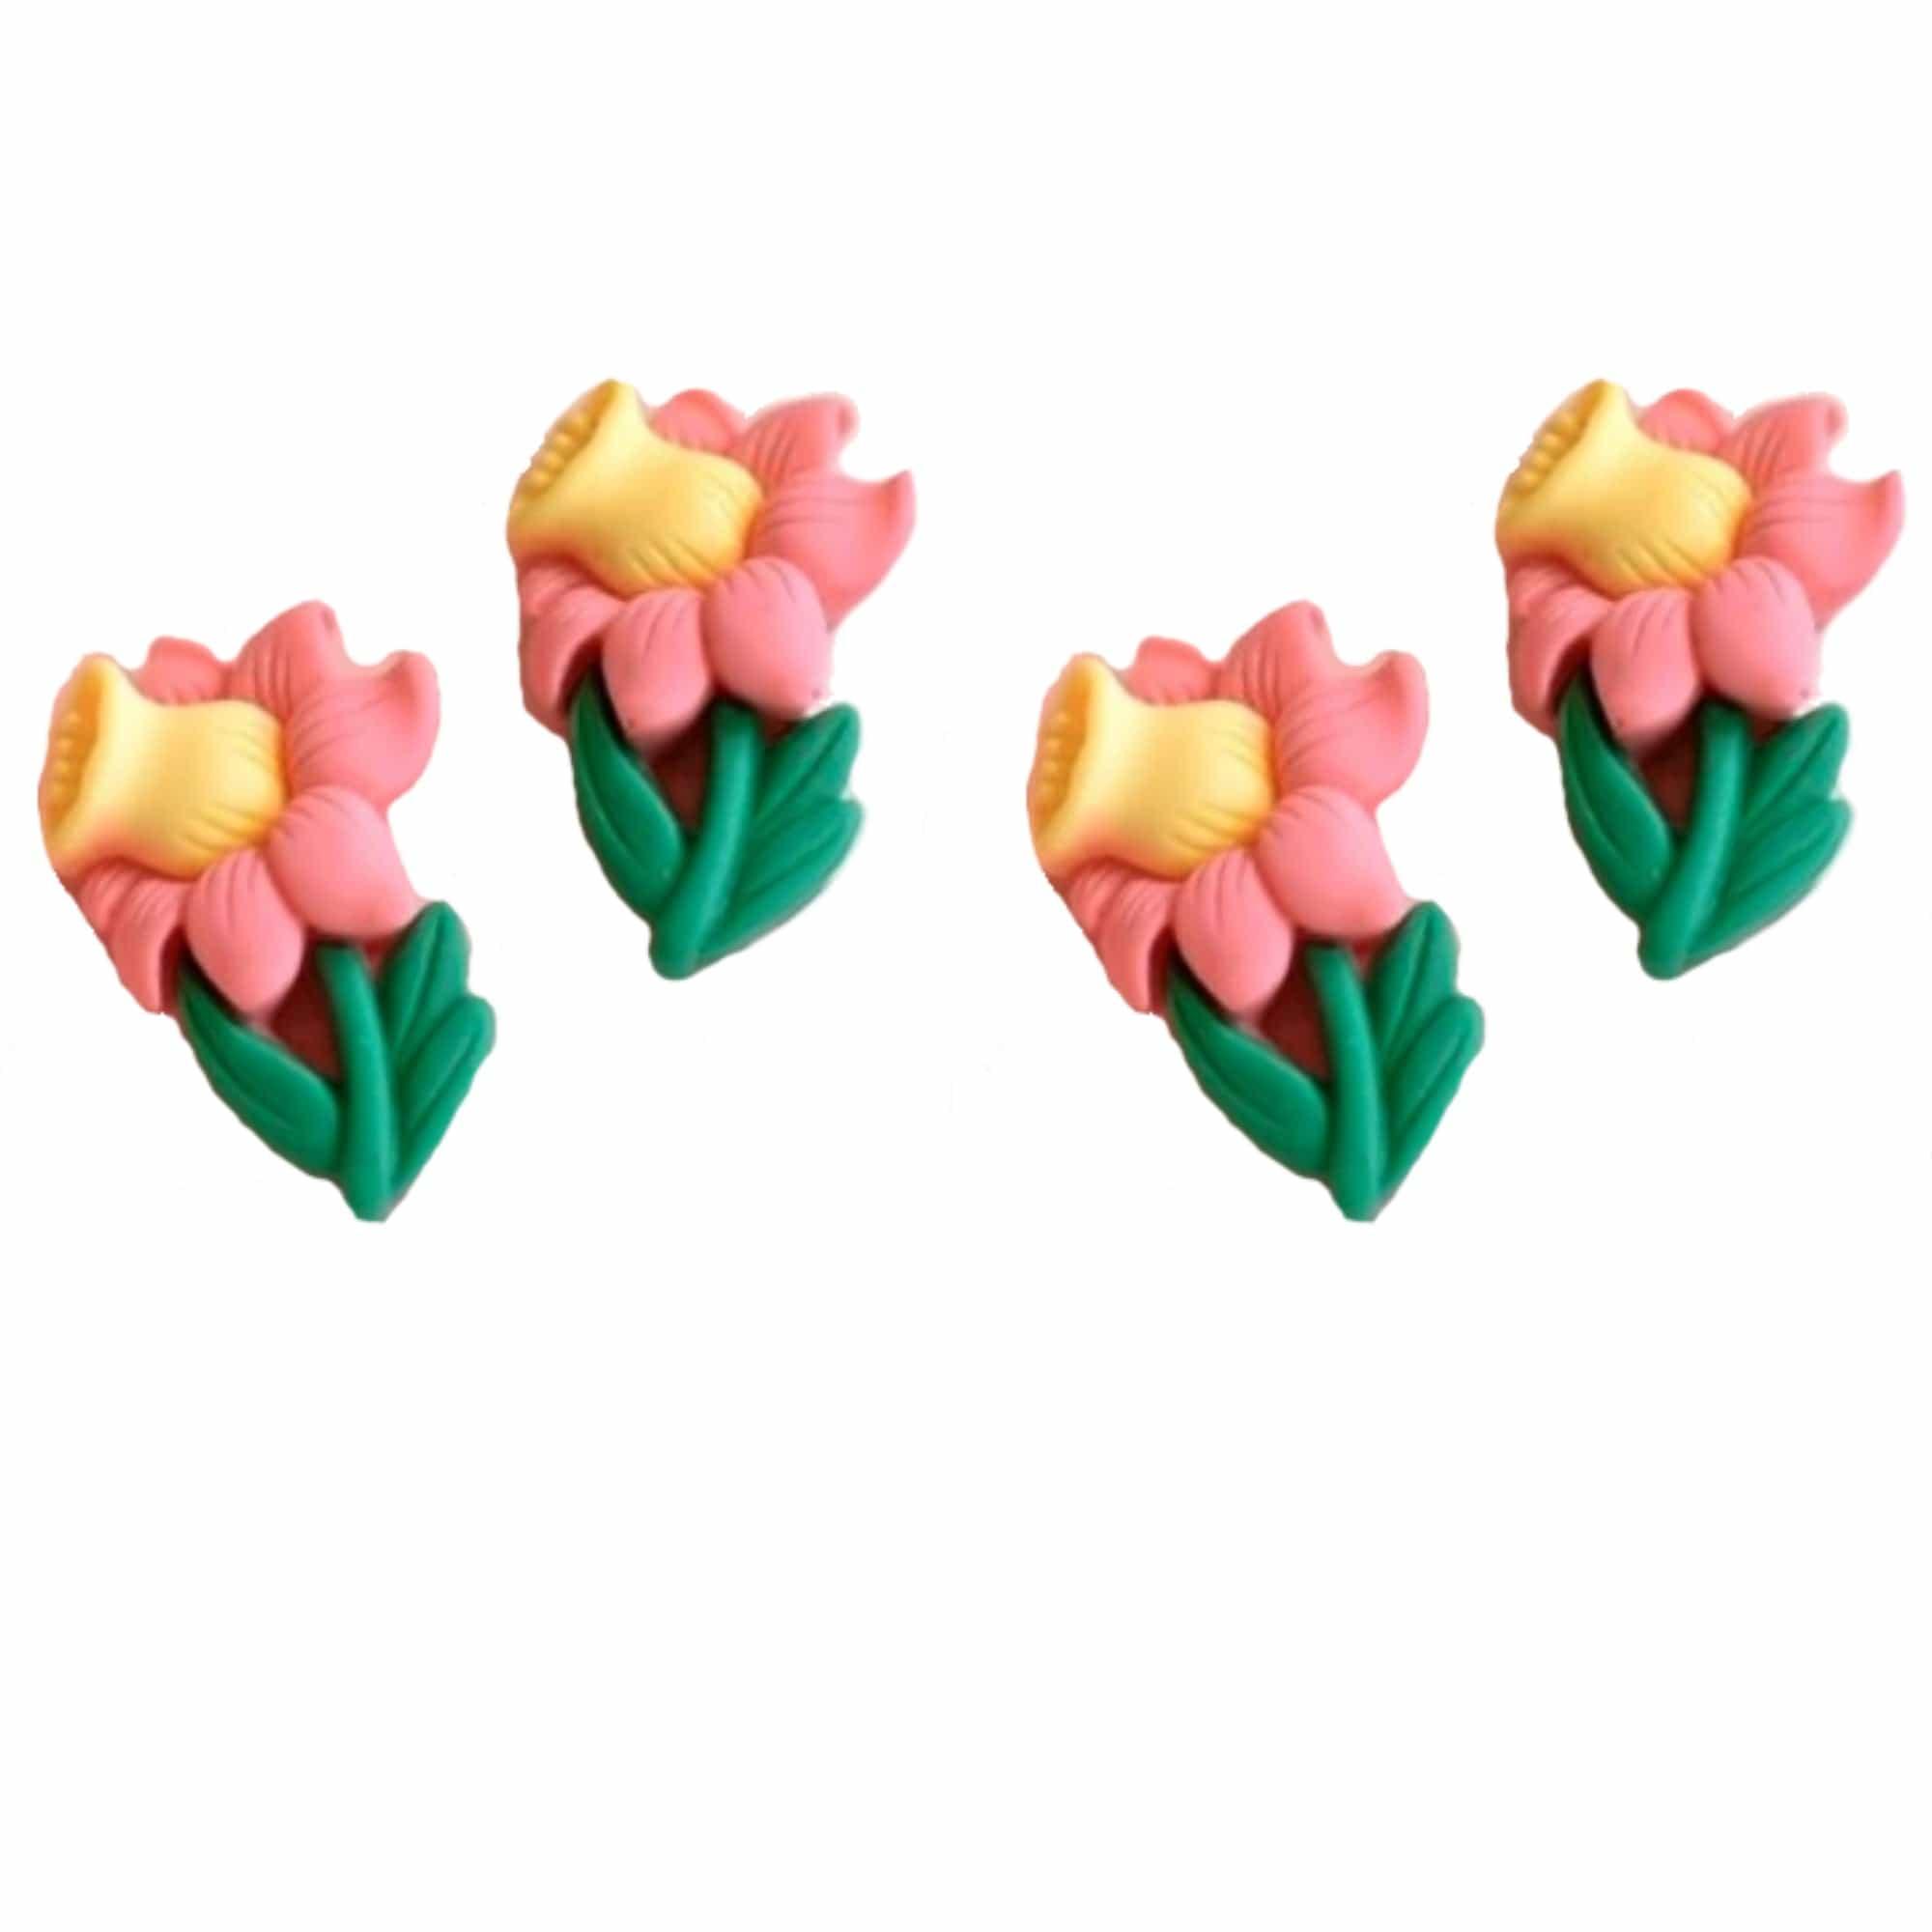 Flower Fun Collection 1" Pink Daffodils Flatback Scrapbook Buttons by SSC Designs - Pkg. of 4